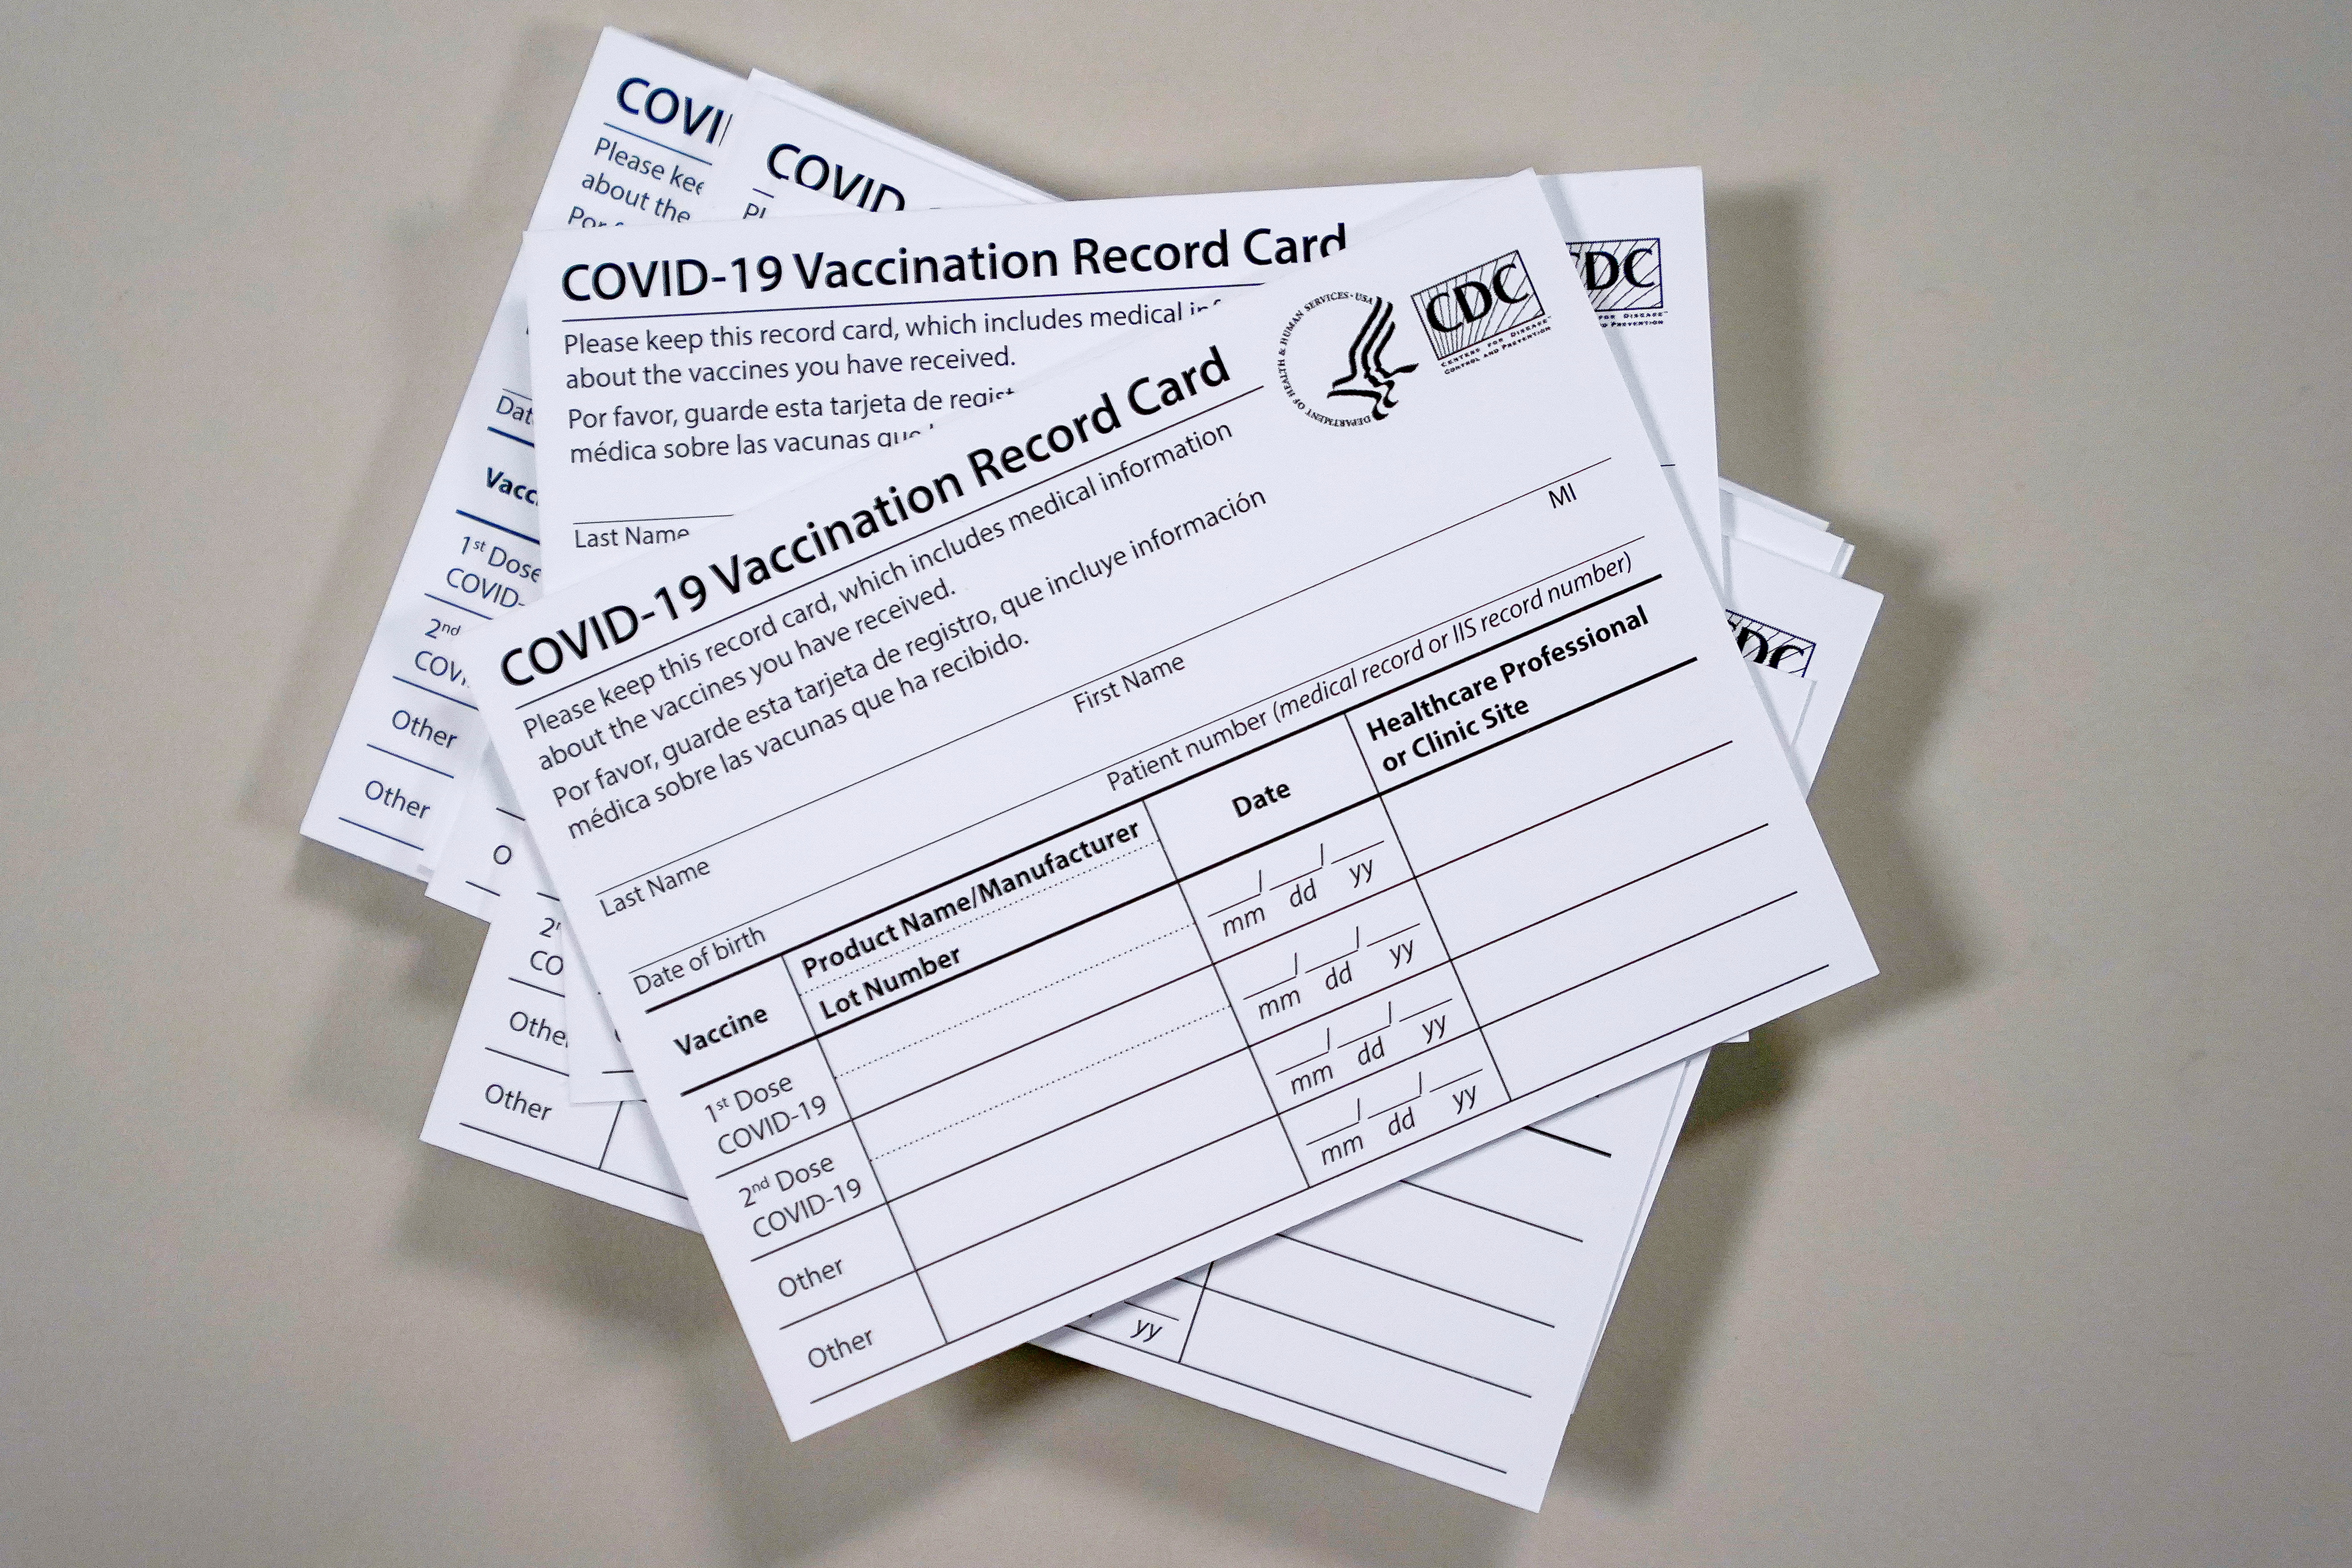 A major hospital in Indiana rehearses its distribution of the COVID-19 vaccine